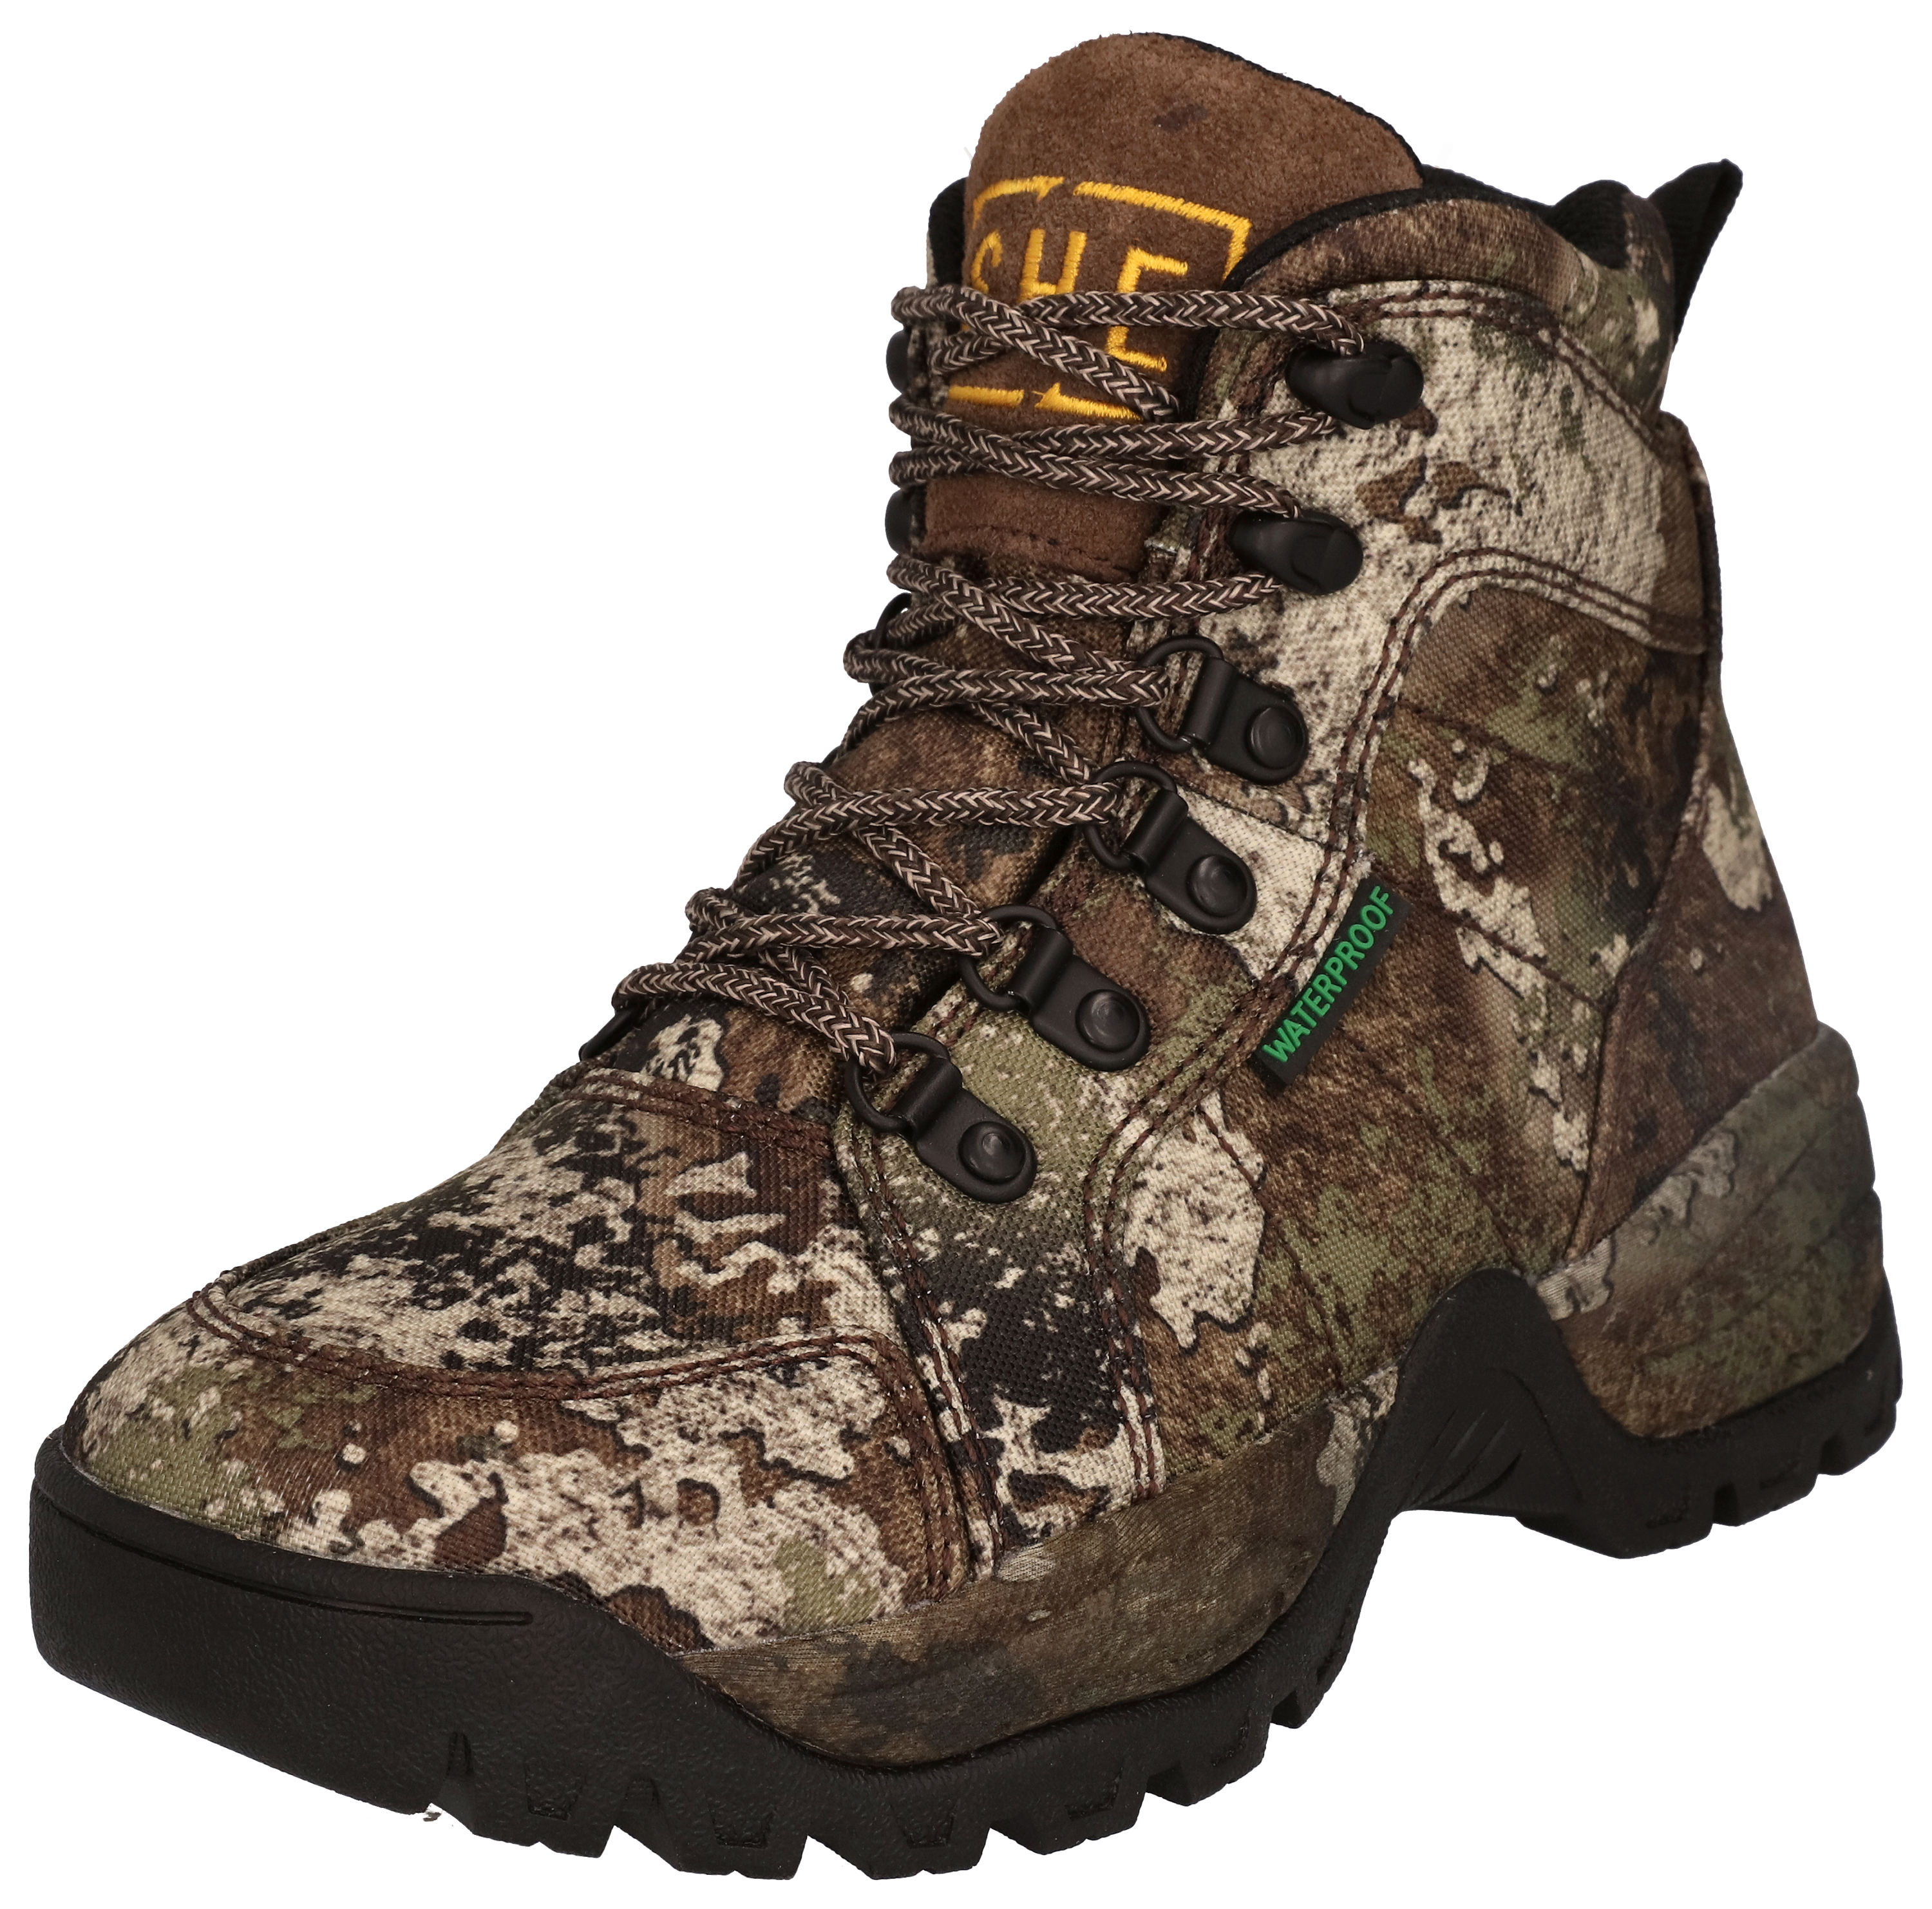 SHE Outdoor Timber Buck Waterproof Hunting Boots for Ladies - TrueTimber Strata - 6M